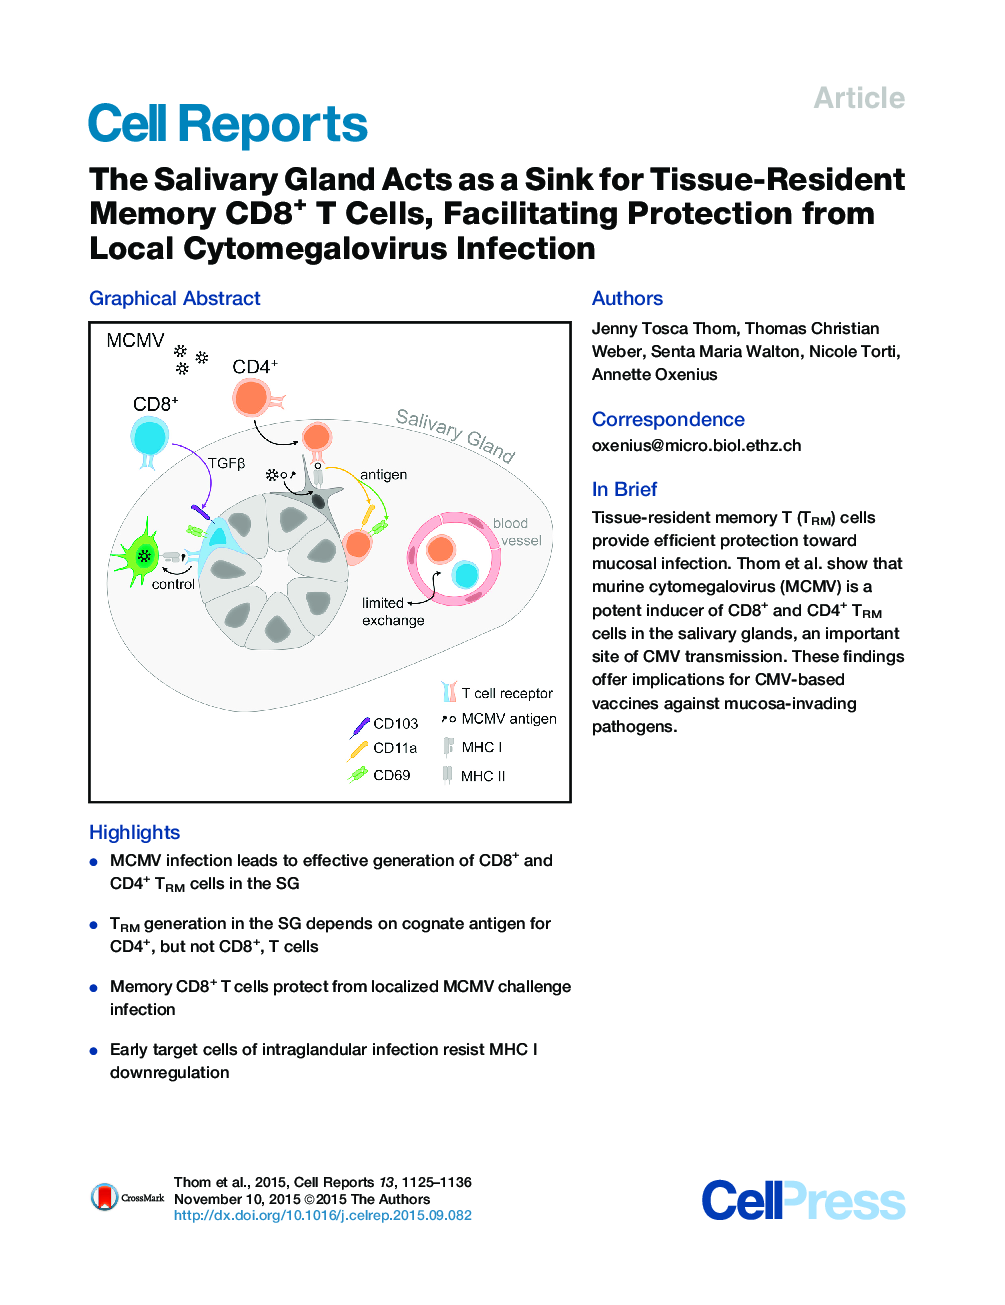 The Salivary Gland Acts as a Sink for Tissue-Resident Memory CD8+ T Cells, Facilitating Protection from Local Cytomegalovirus Infection 